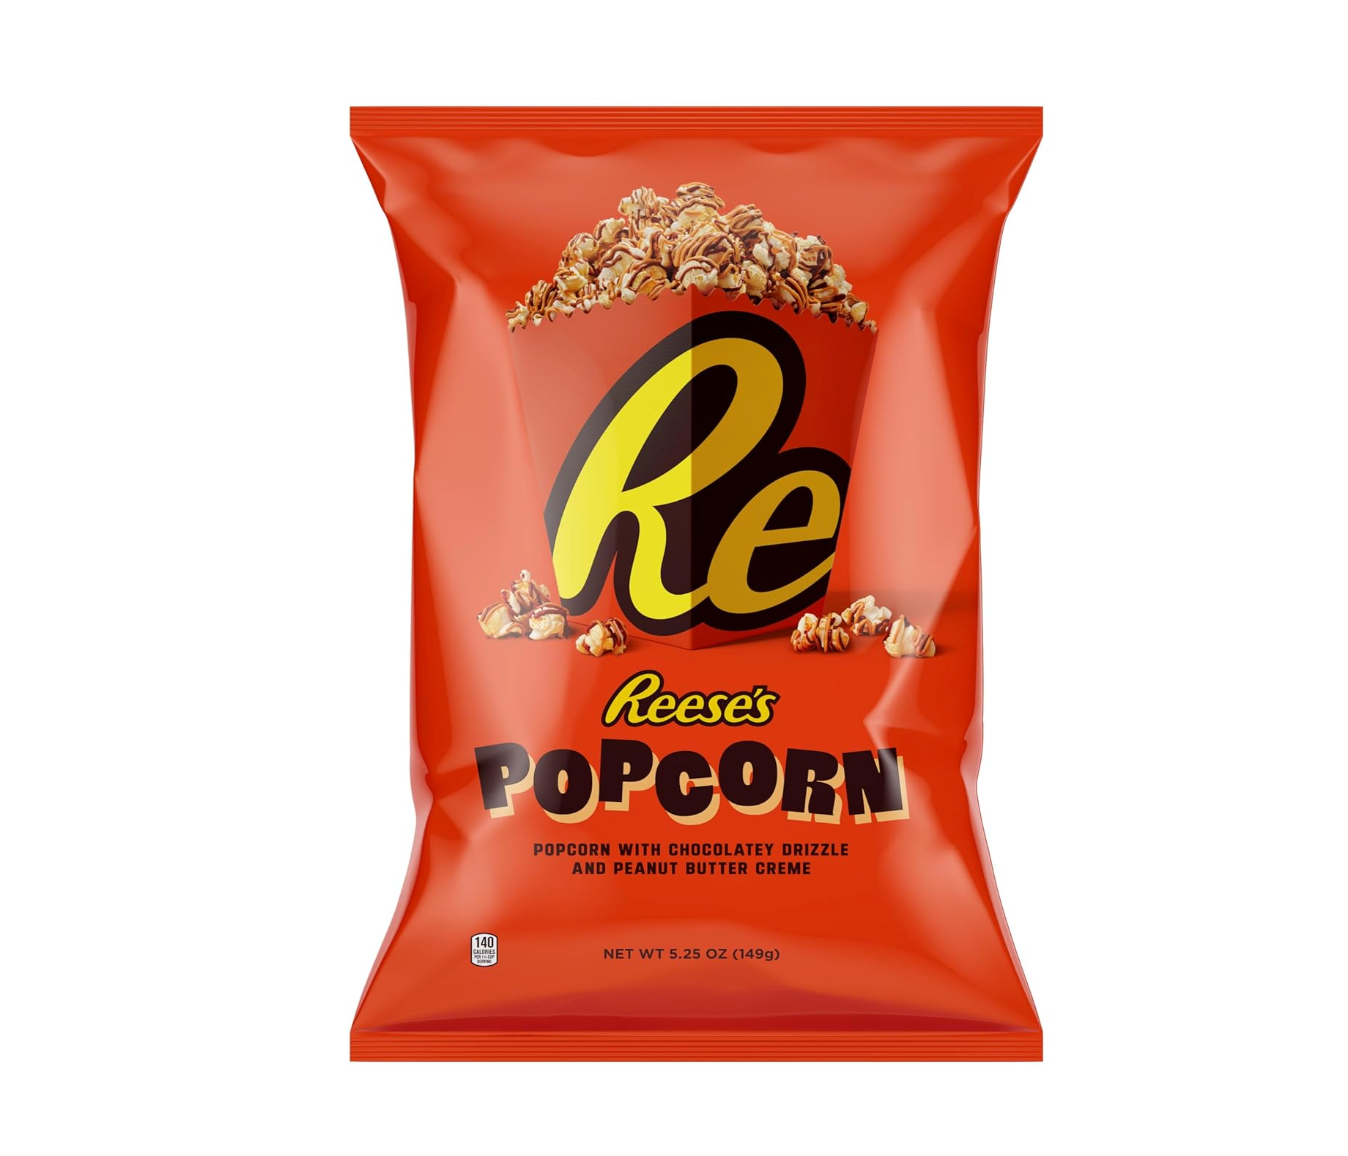 Reese's - Chocolate Peanut Butter Drizzled Popcorn - 149g